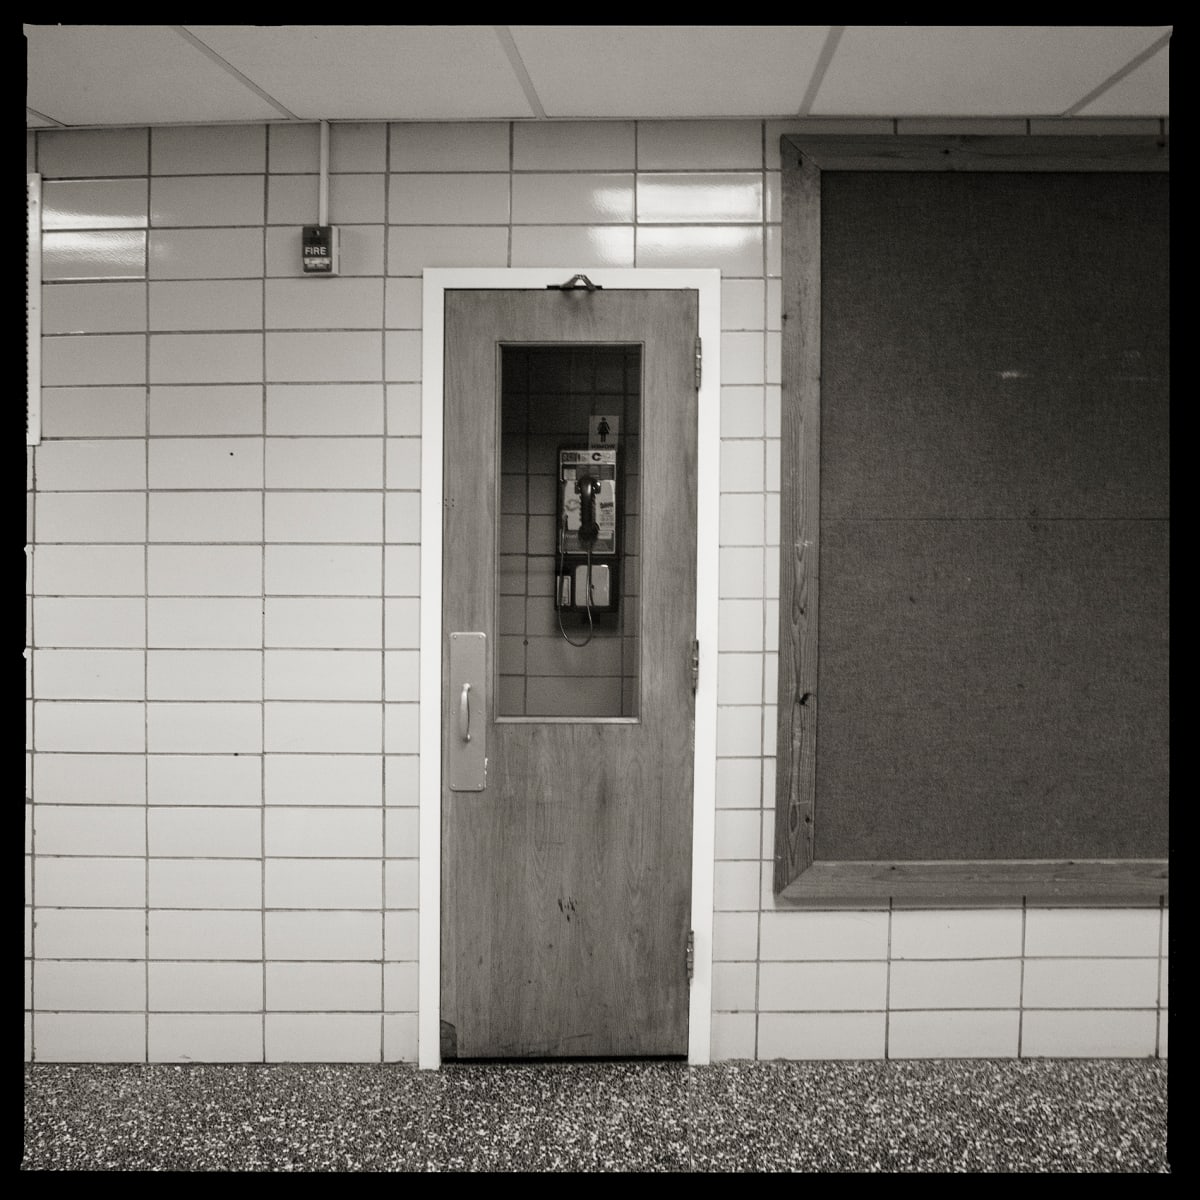 585.223.9793 – Johanna Perrin School, 85 Potter Place, Fairport, NY 14450 by Eric T. Kunsman  Image: ID: A black and white image shows a tiled wall with a door in the middle and a bulletin board to the right. The door has a window on it, and through the window is a payphone.